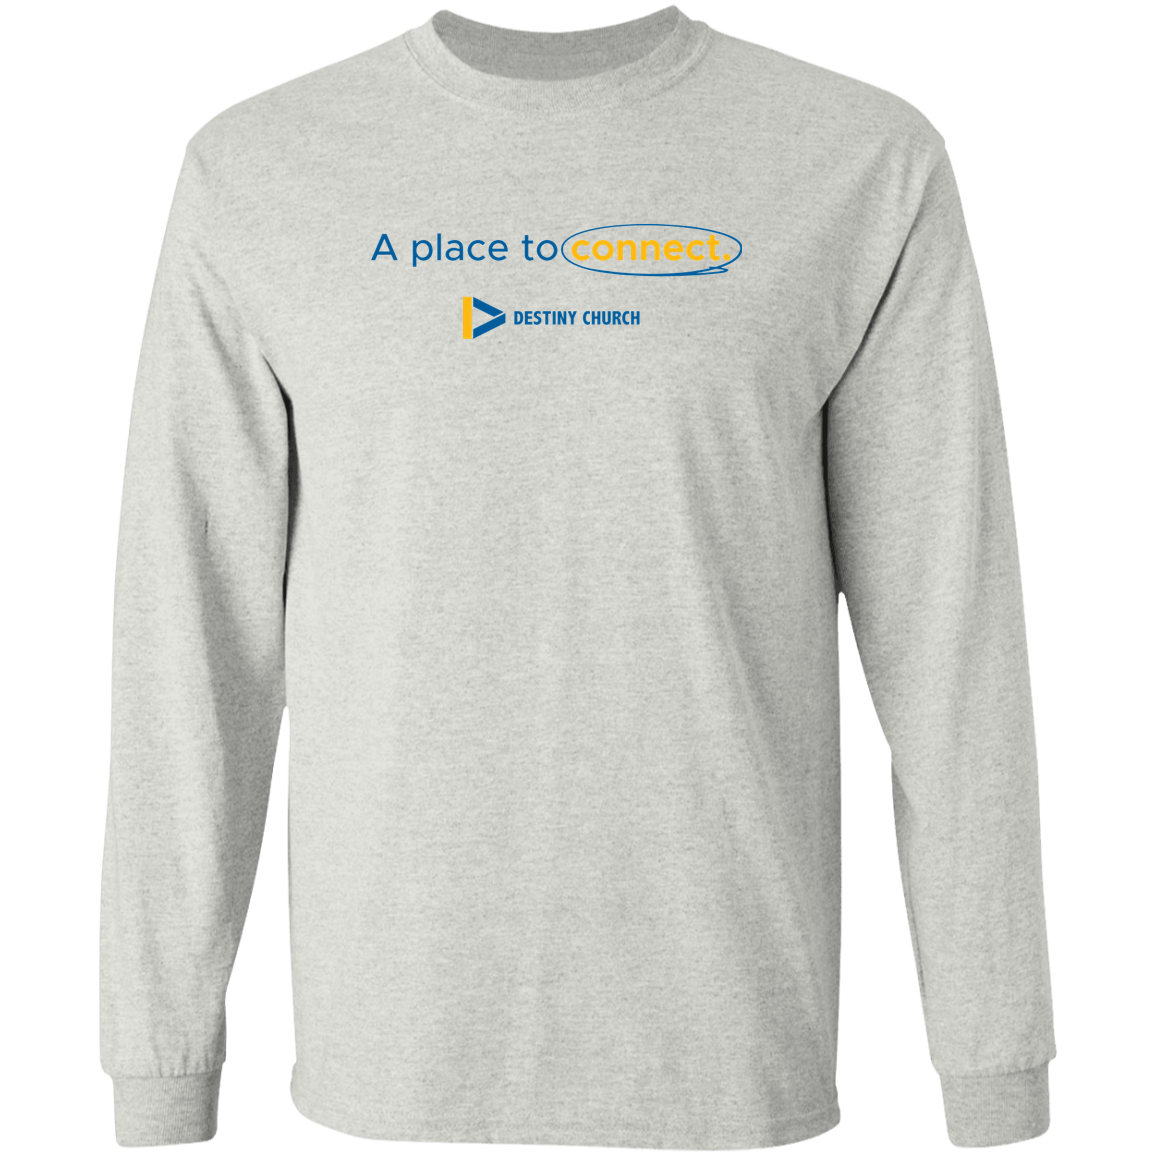 A Place to Connect - Long Sleeves